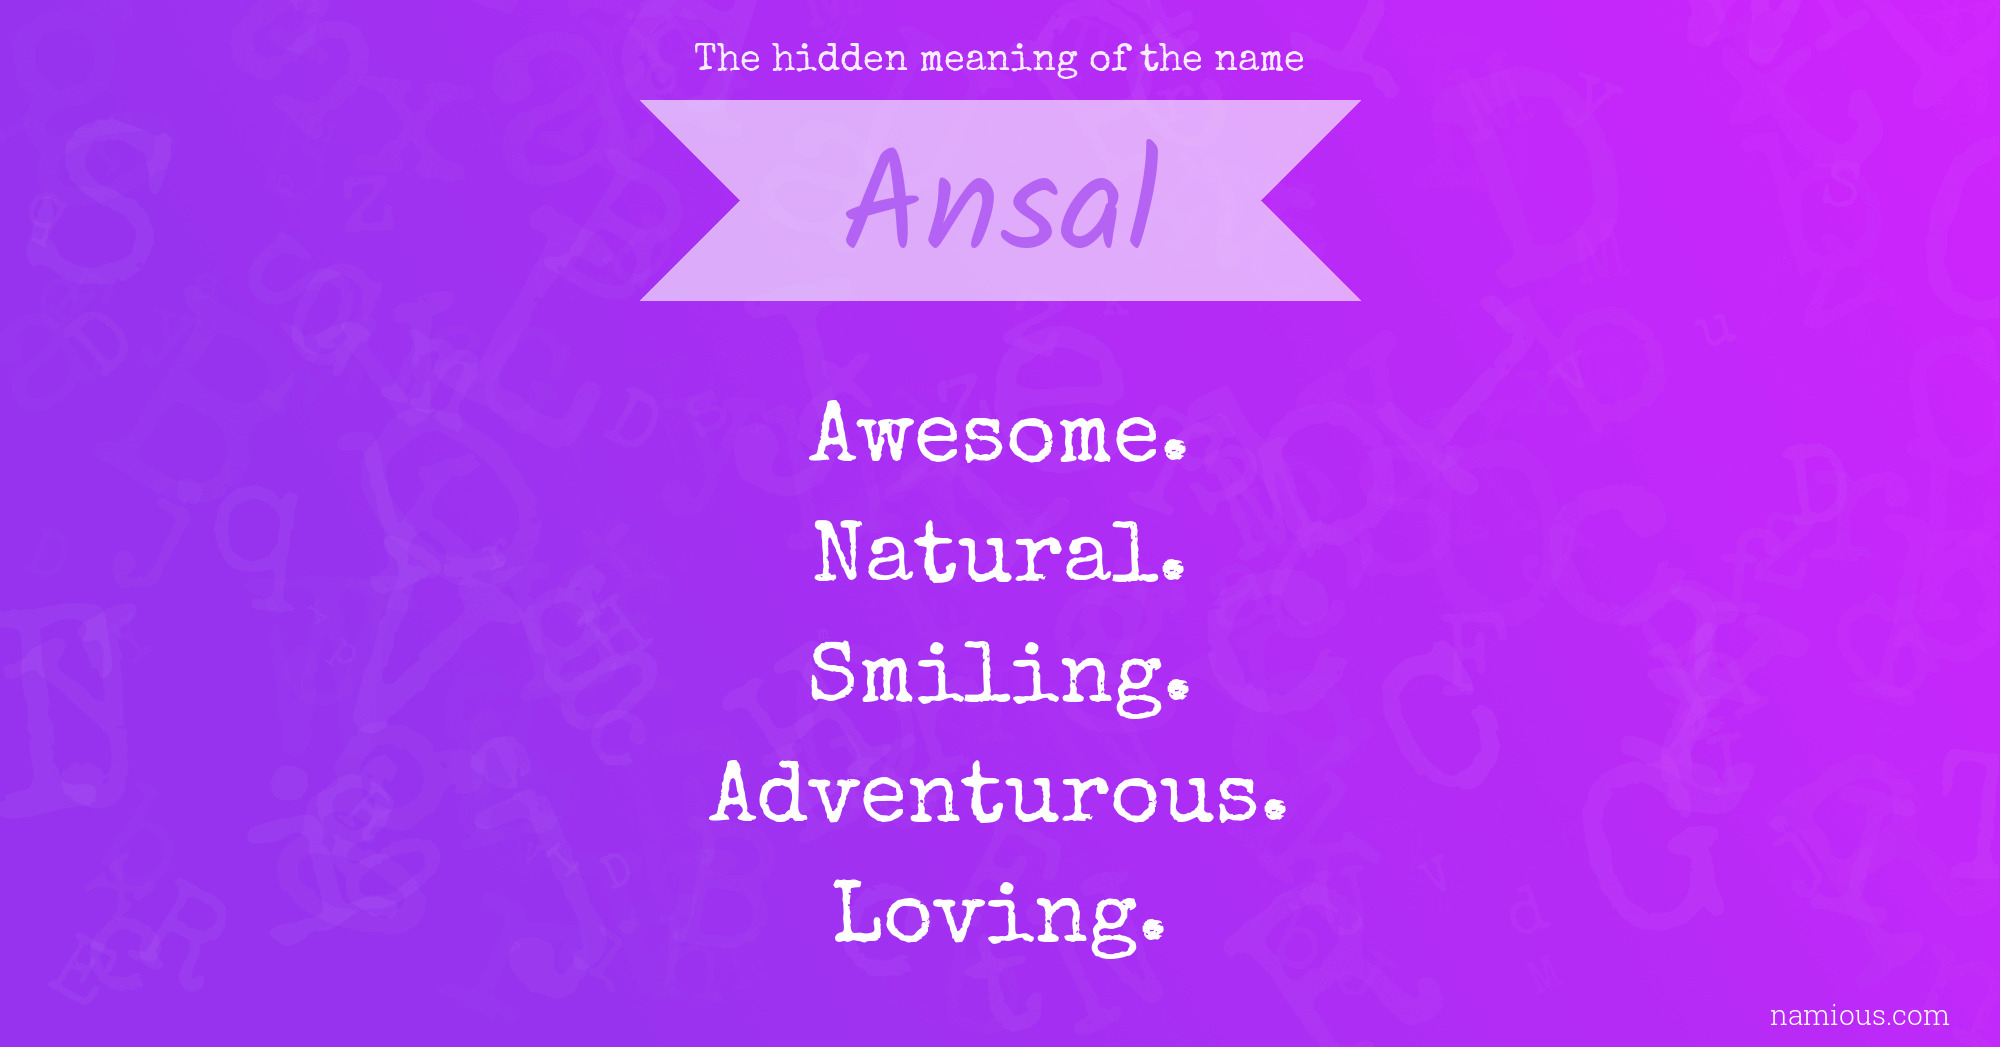 The hidden meaning of the name Ansal